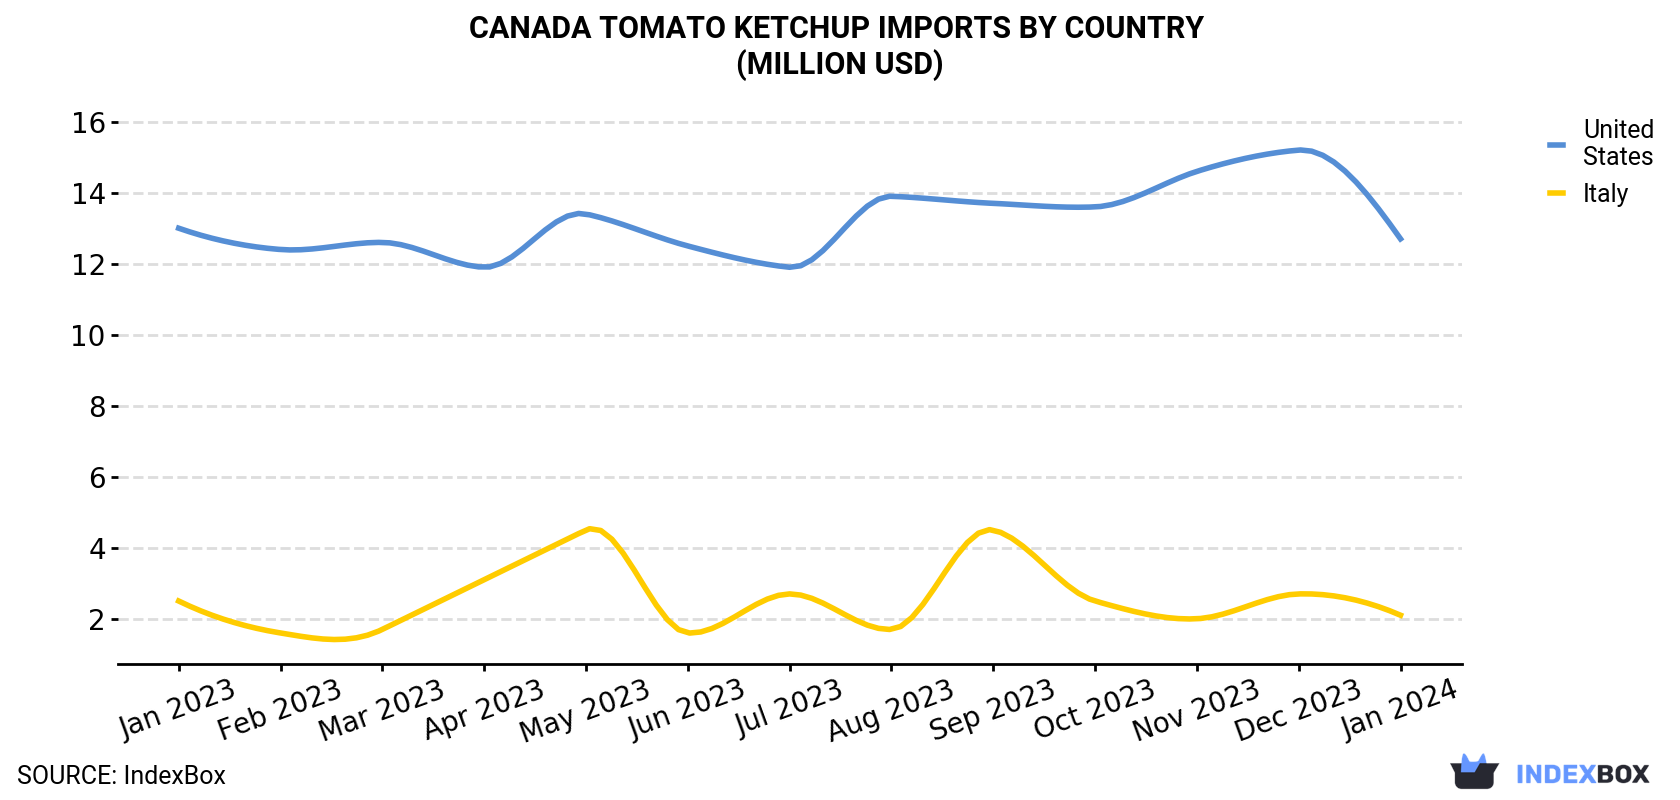 Canada Tomato Ketchup Imports By Country (Million USD)